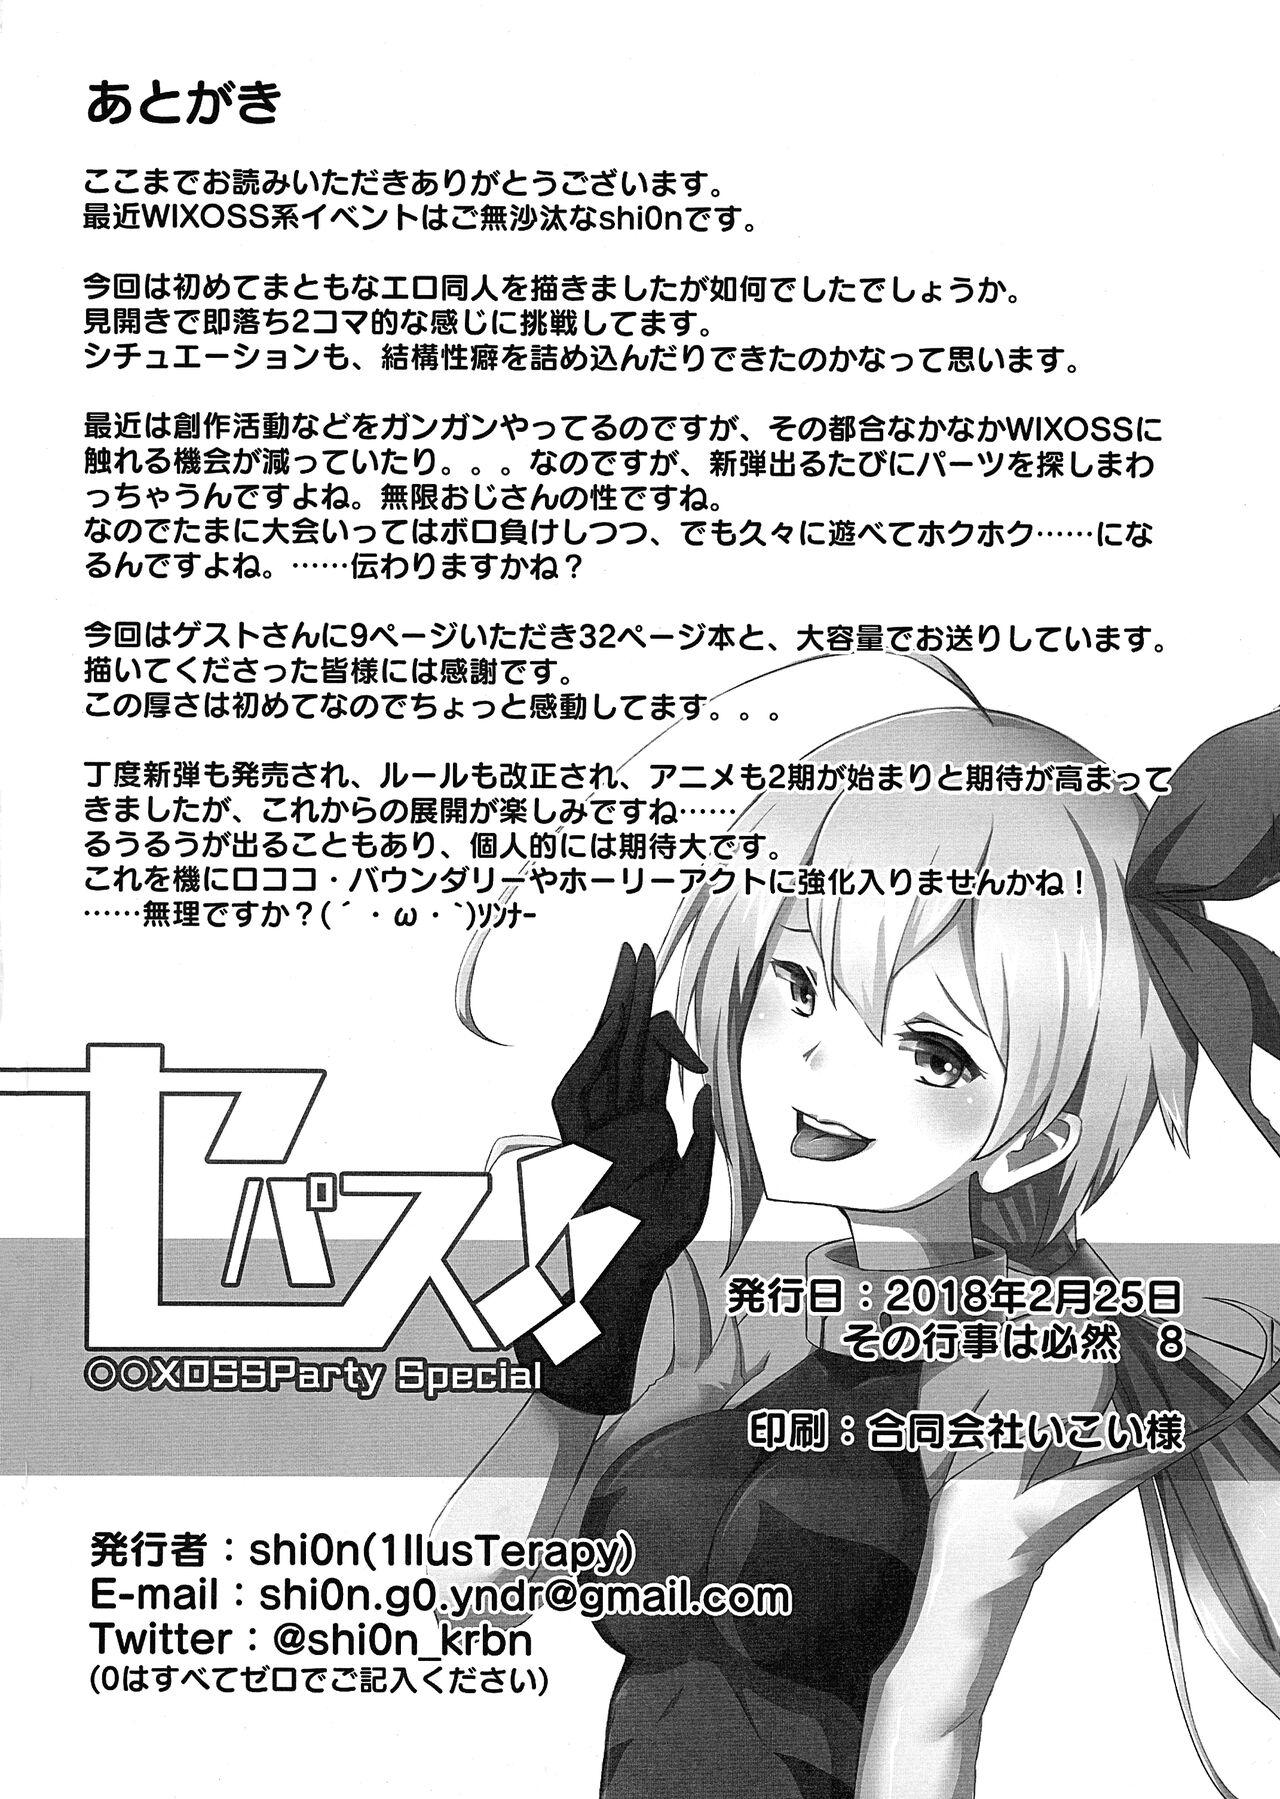 Fat Sepas!! - Selector infected wixoss Jerk - Page 33